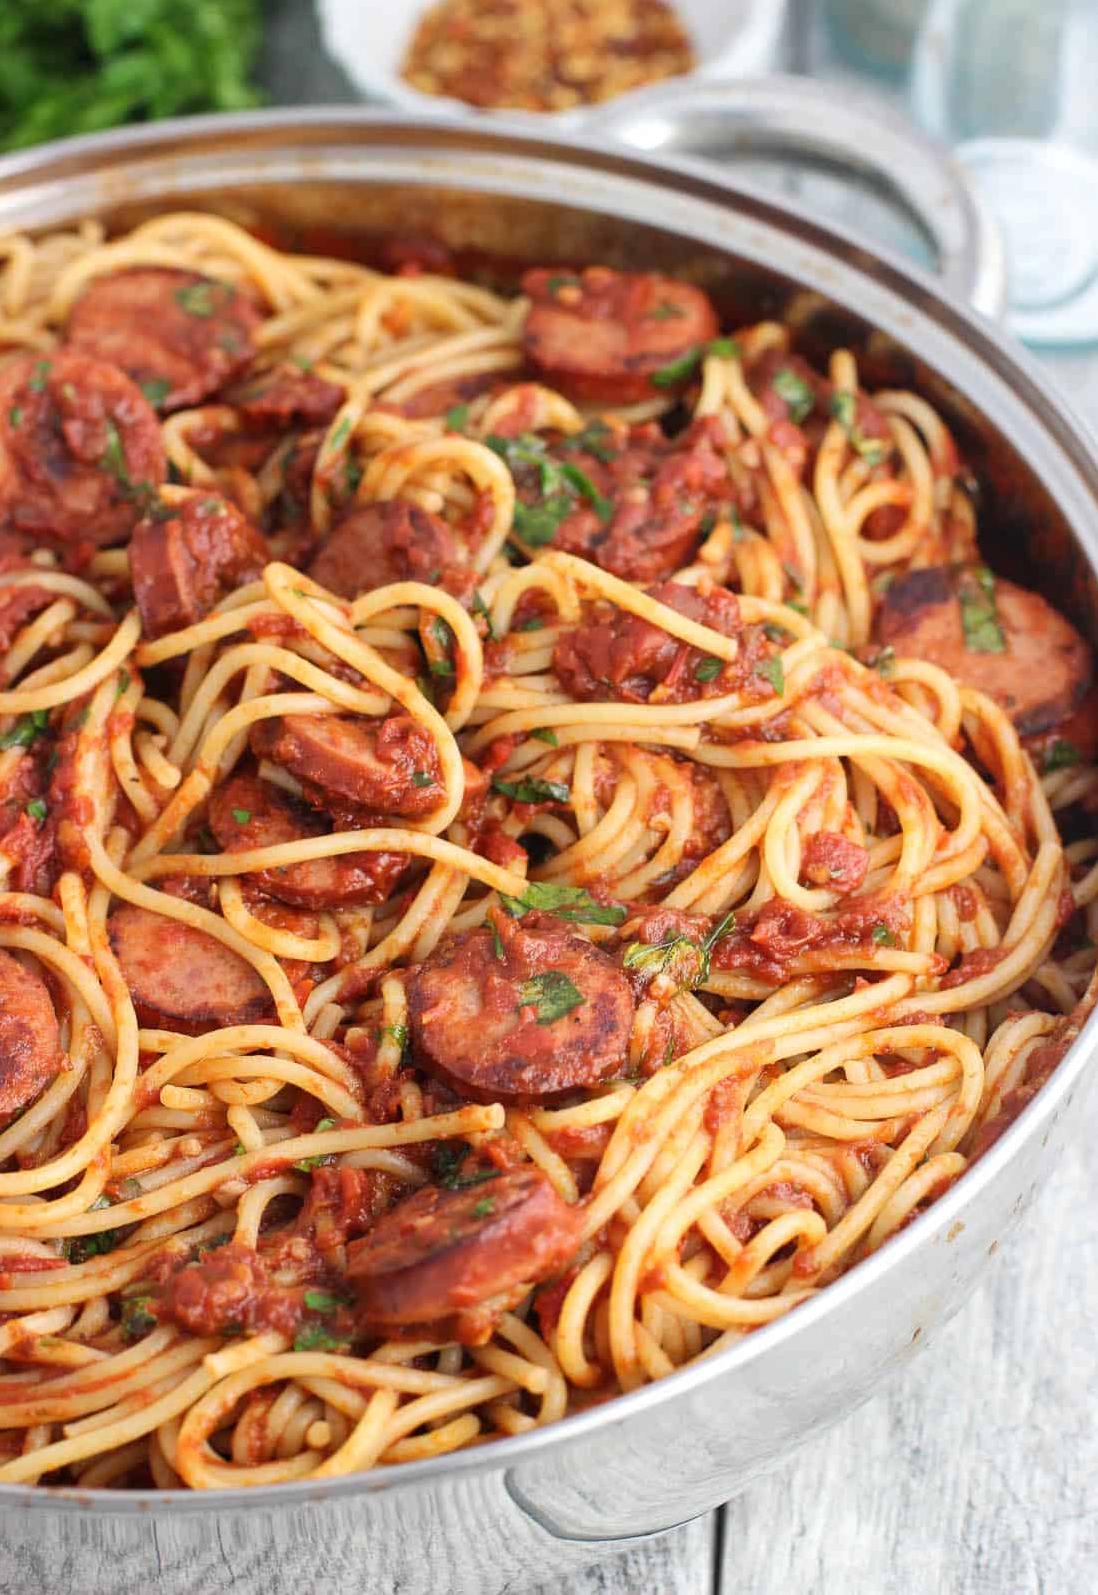  Indulge in a hearty bowl of pasta for a comforting dinner.